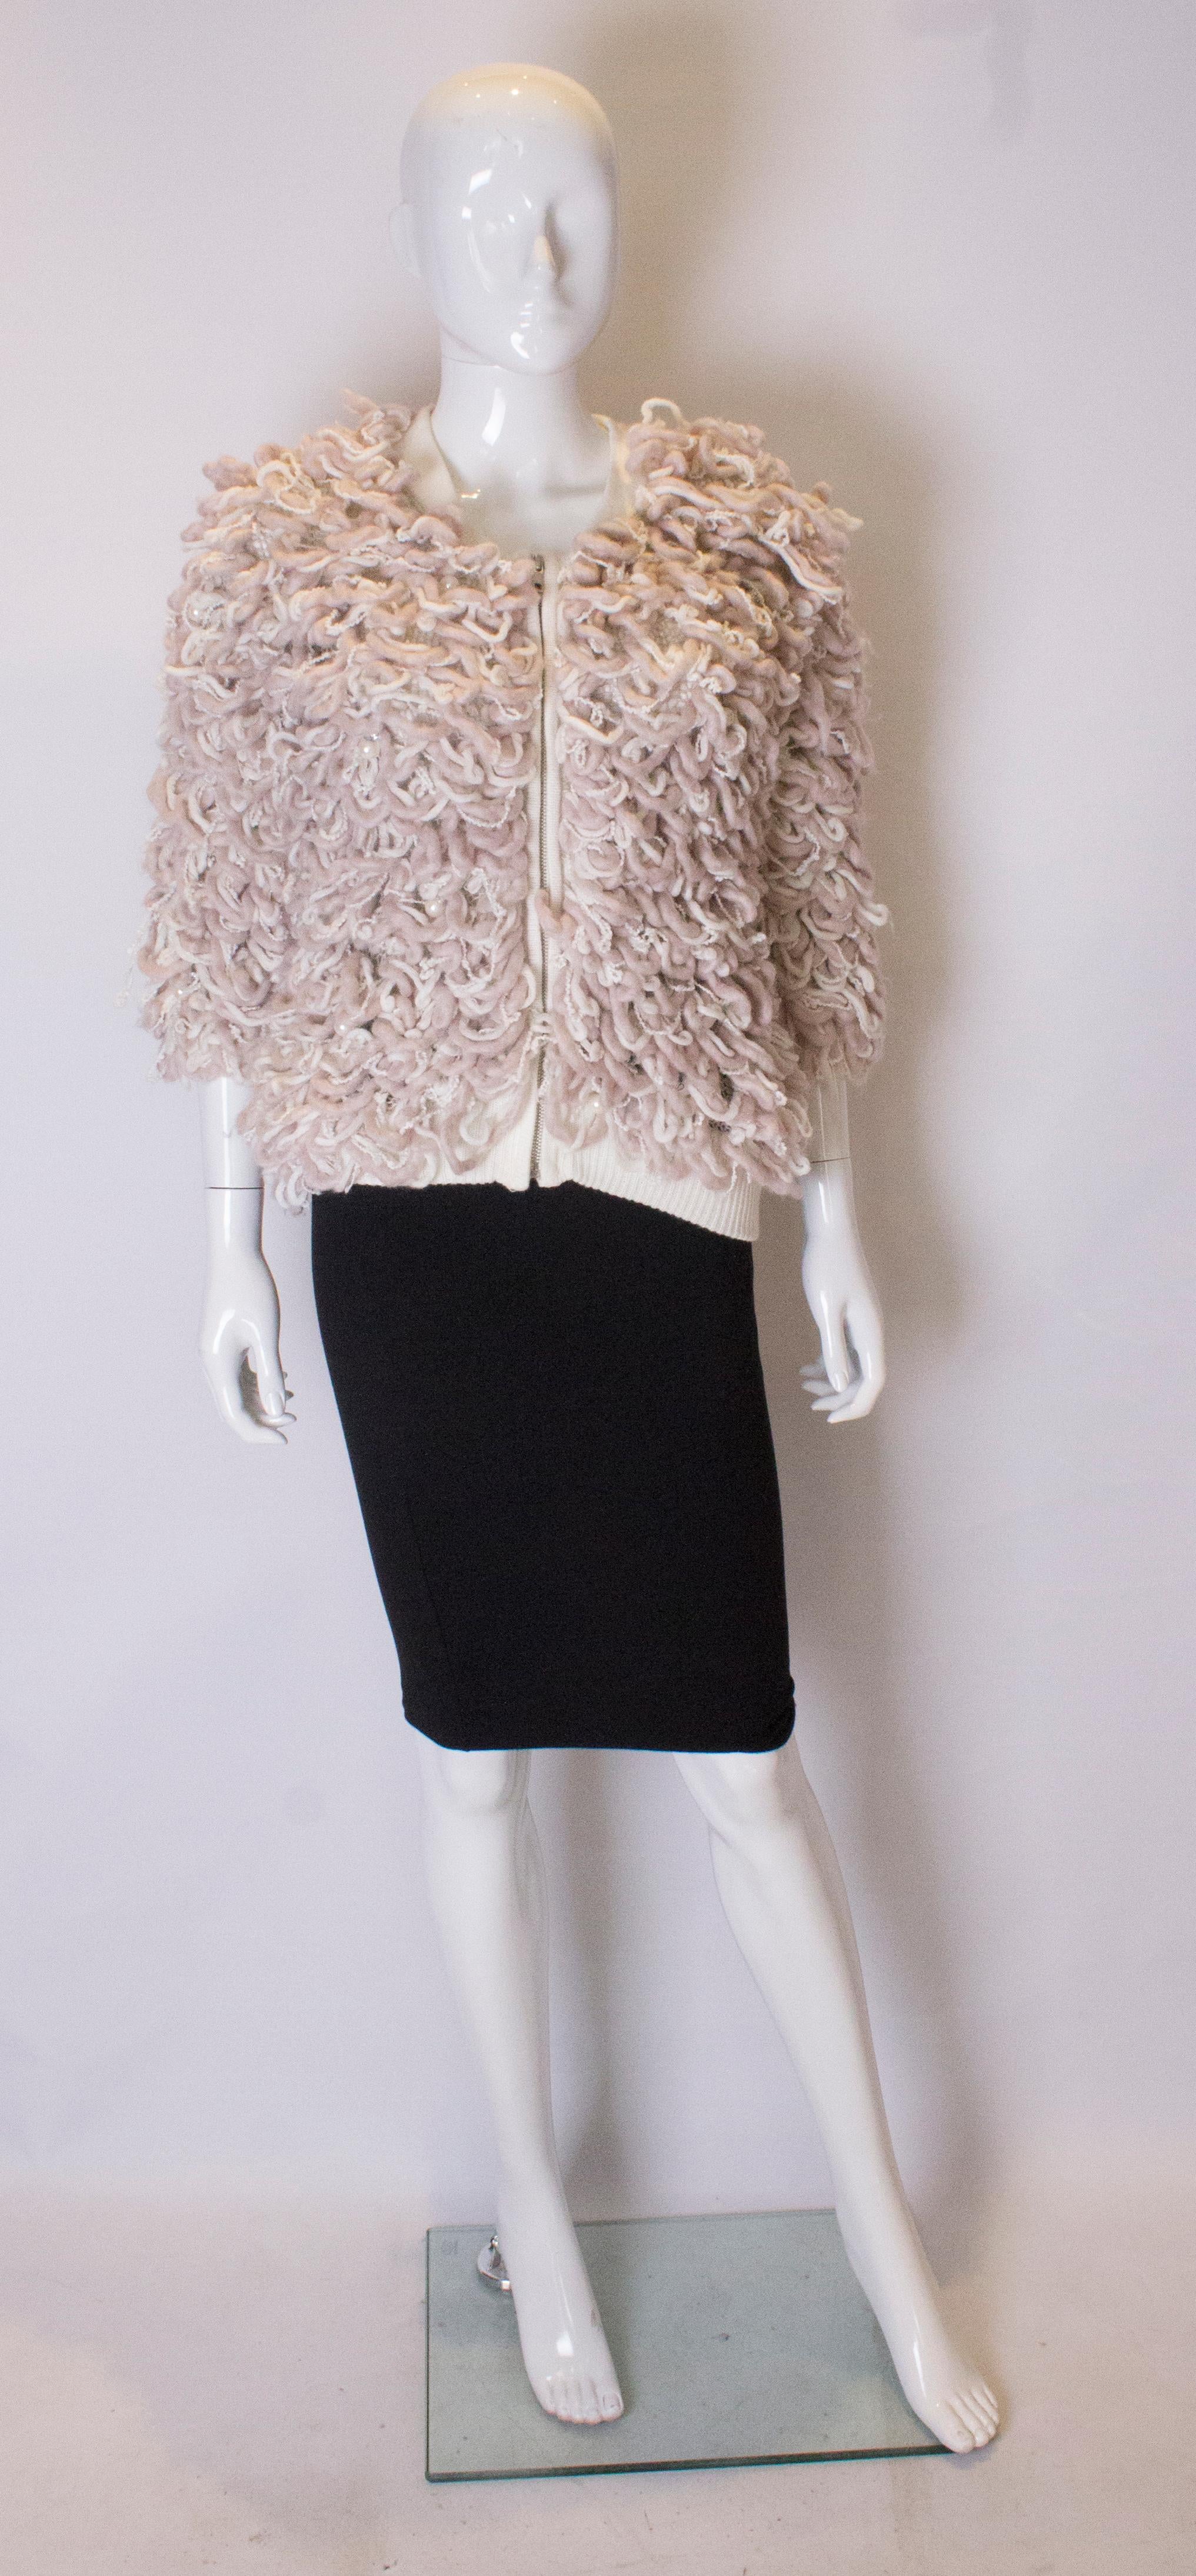 A warm and unusual jacket. The jacket is in a soft pink and white with ribbing at the hem and collar.  It has a v nekcline with a zip front opening and is decorated with pearls and diamante.